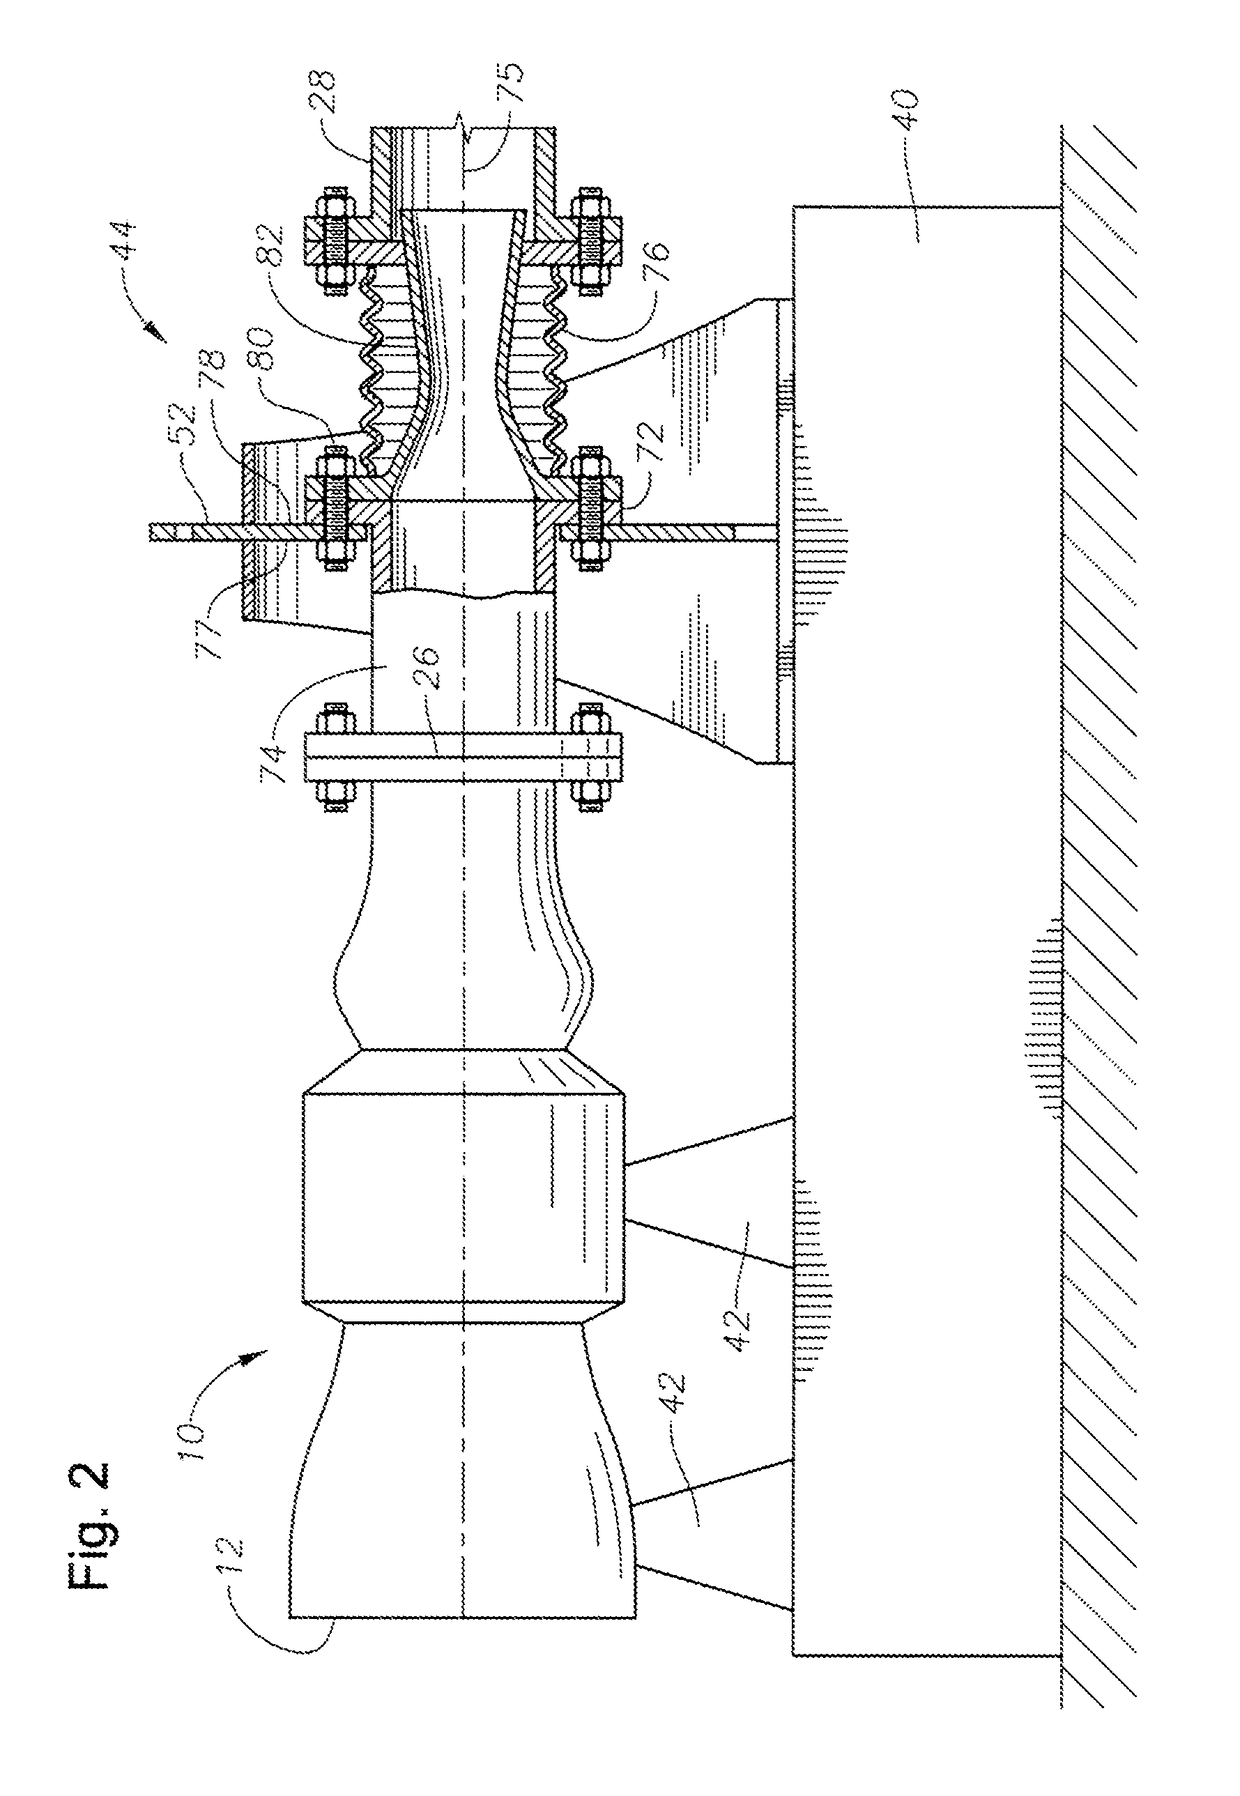 Method and apparatus for supplying heated, pressurized air